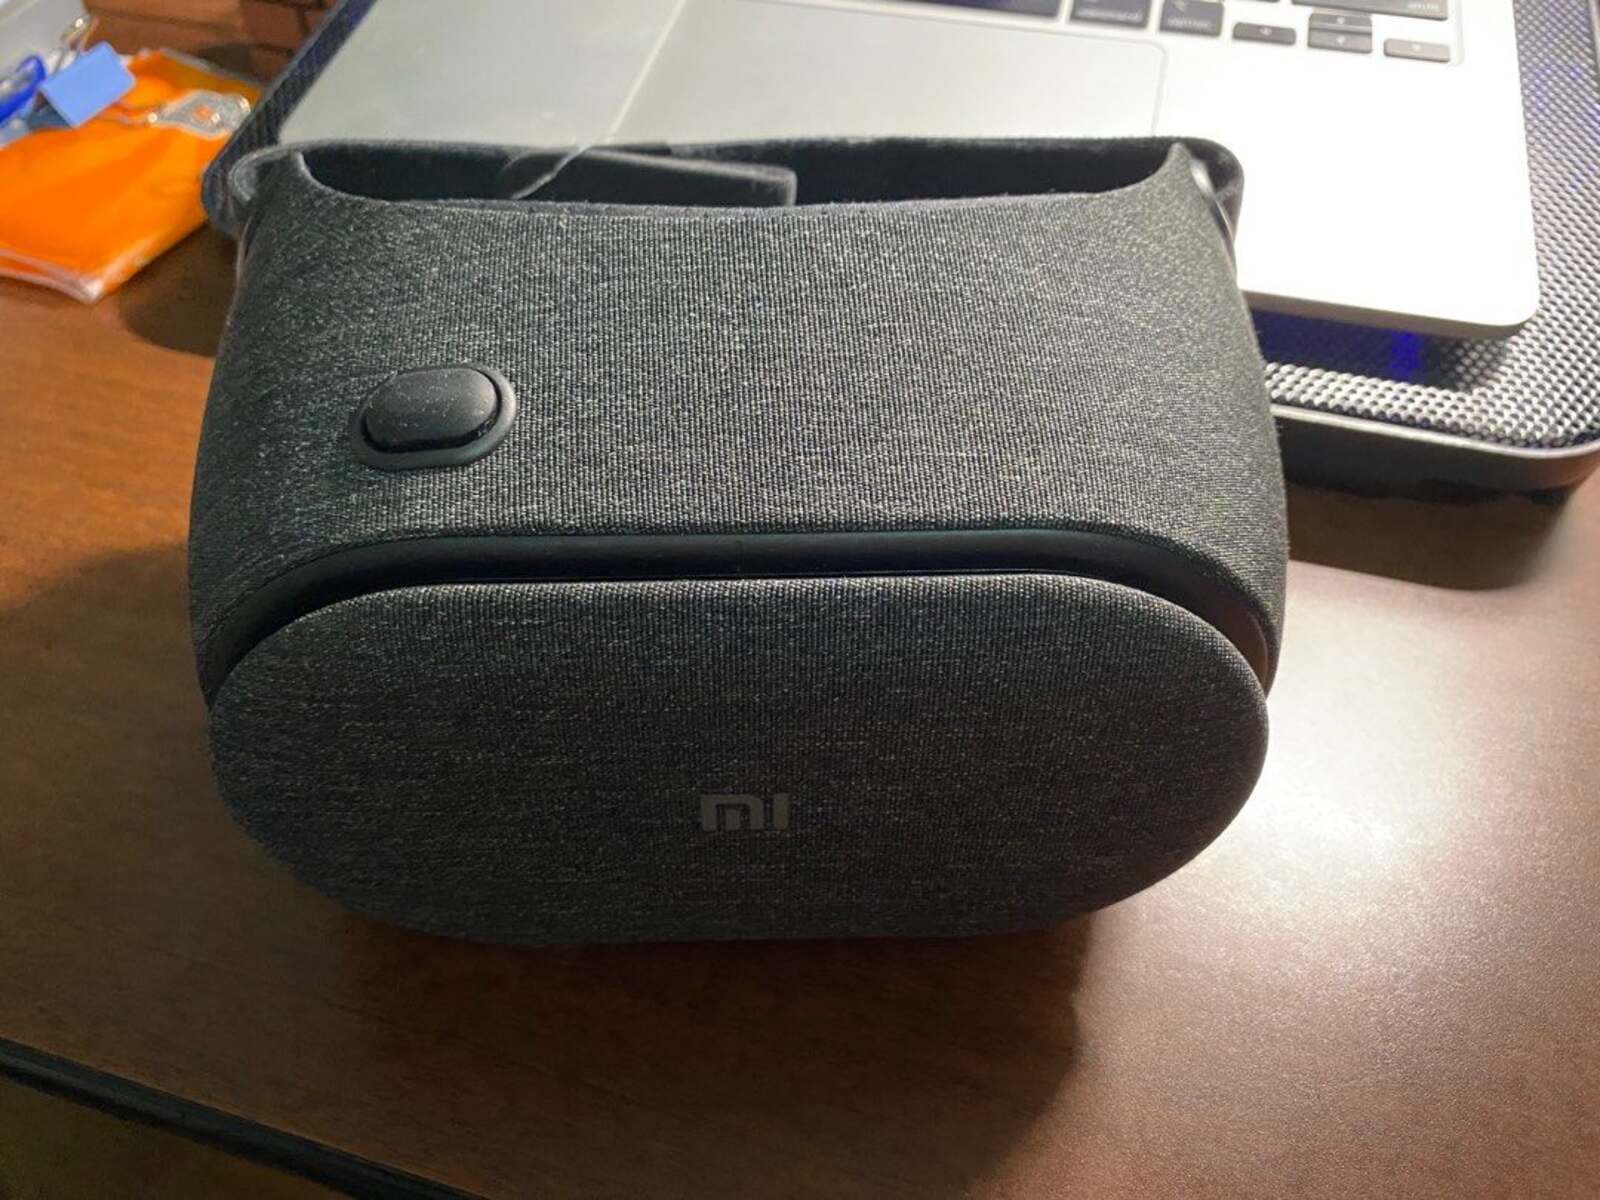 step-by-step-guide-to-setup-xiaomi-play-2-vr-on-android